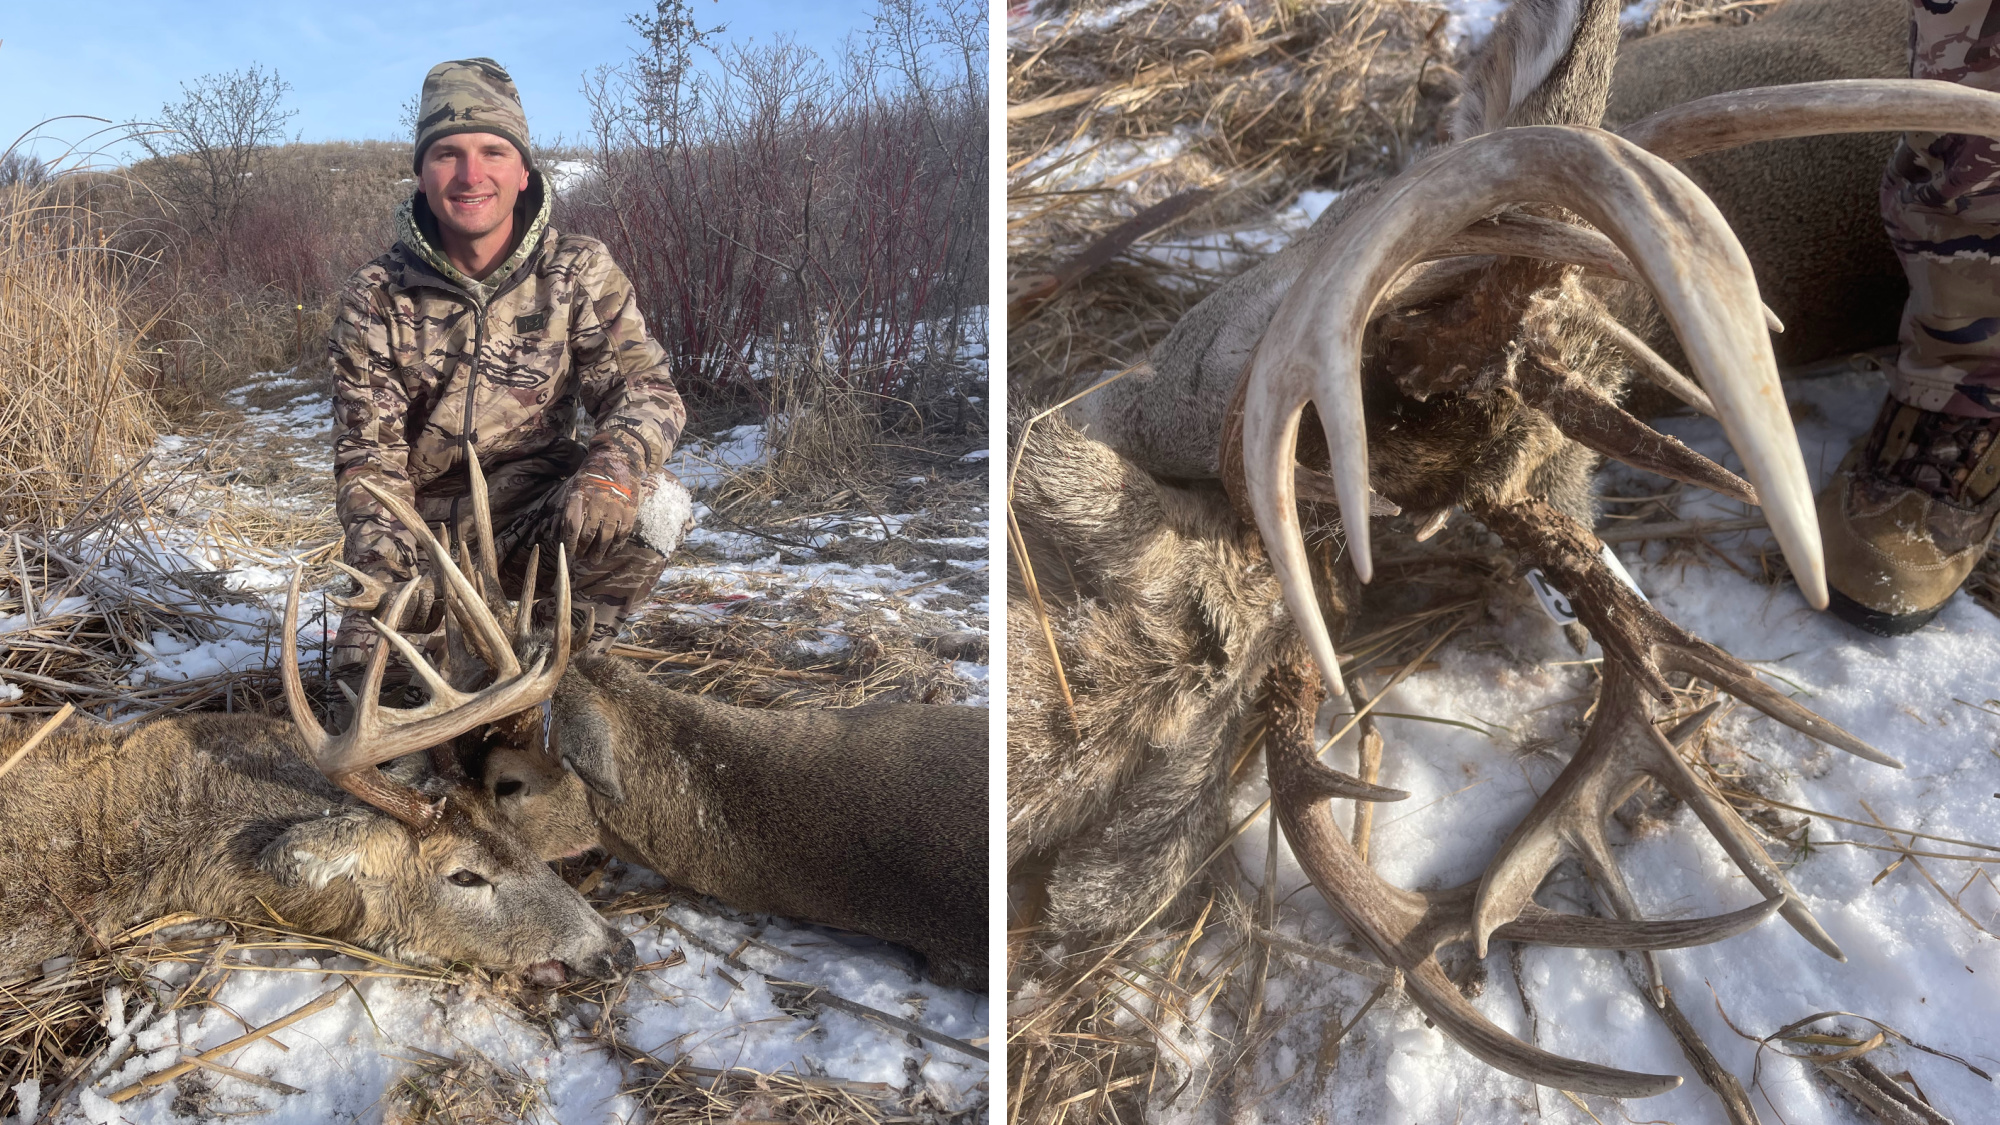 spencer olson with two whitetail deer locked up